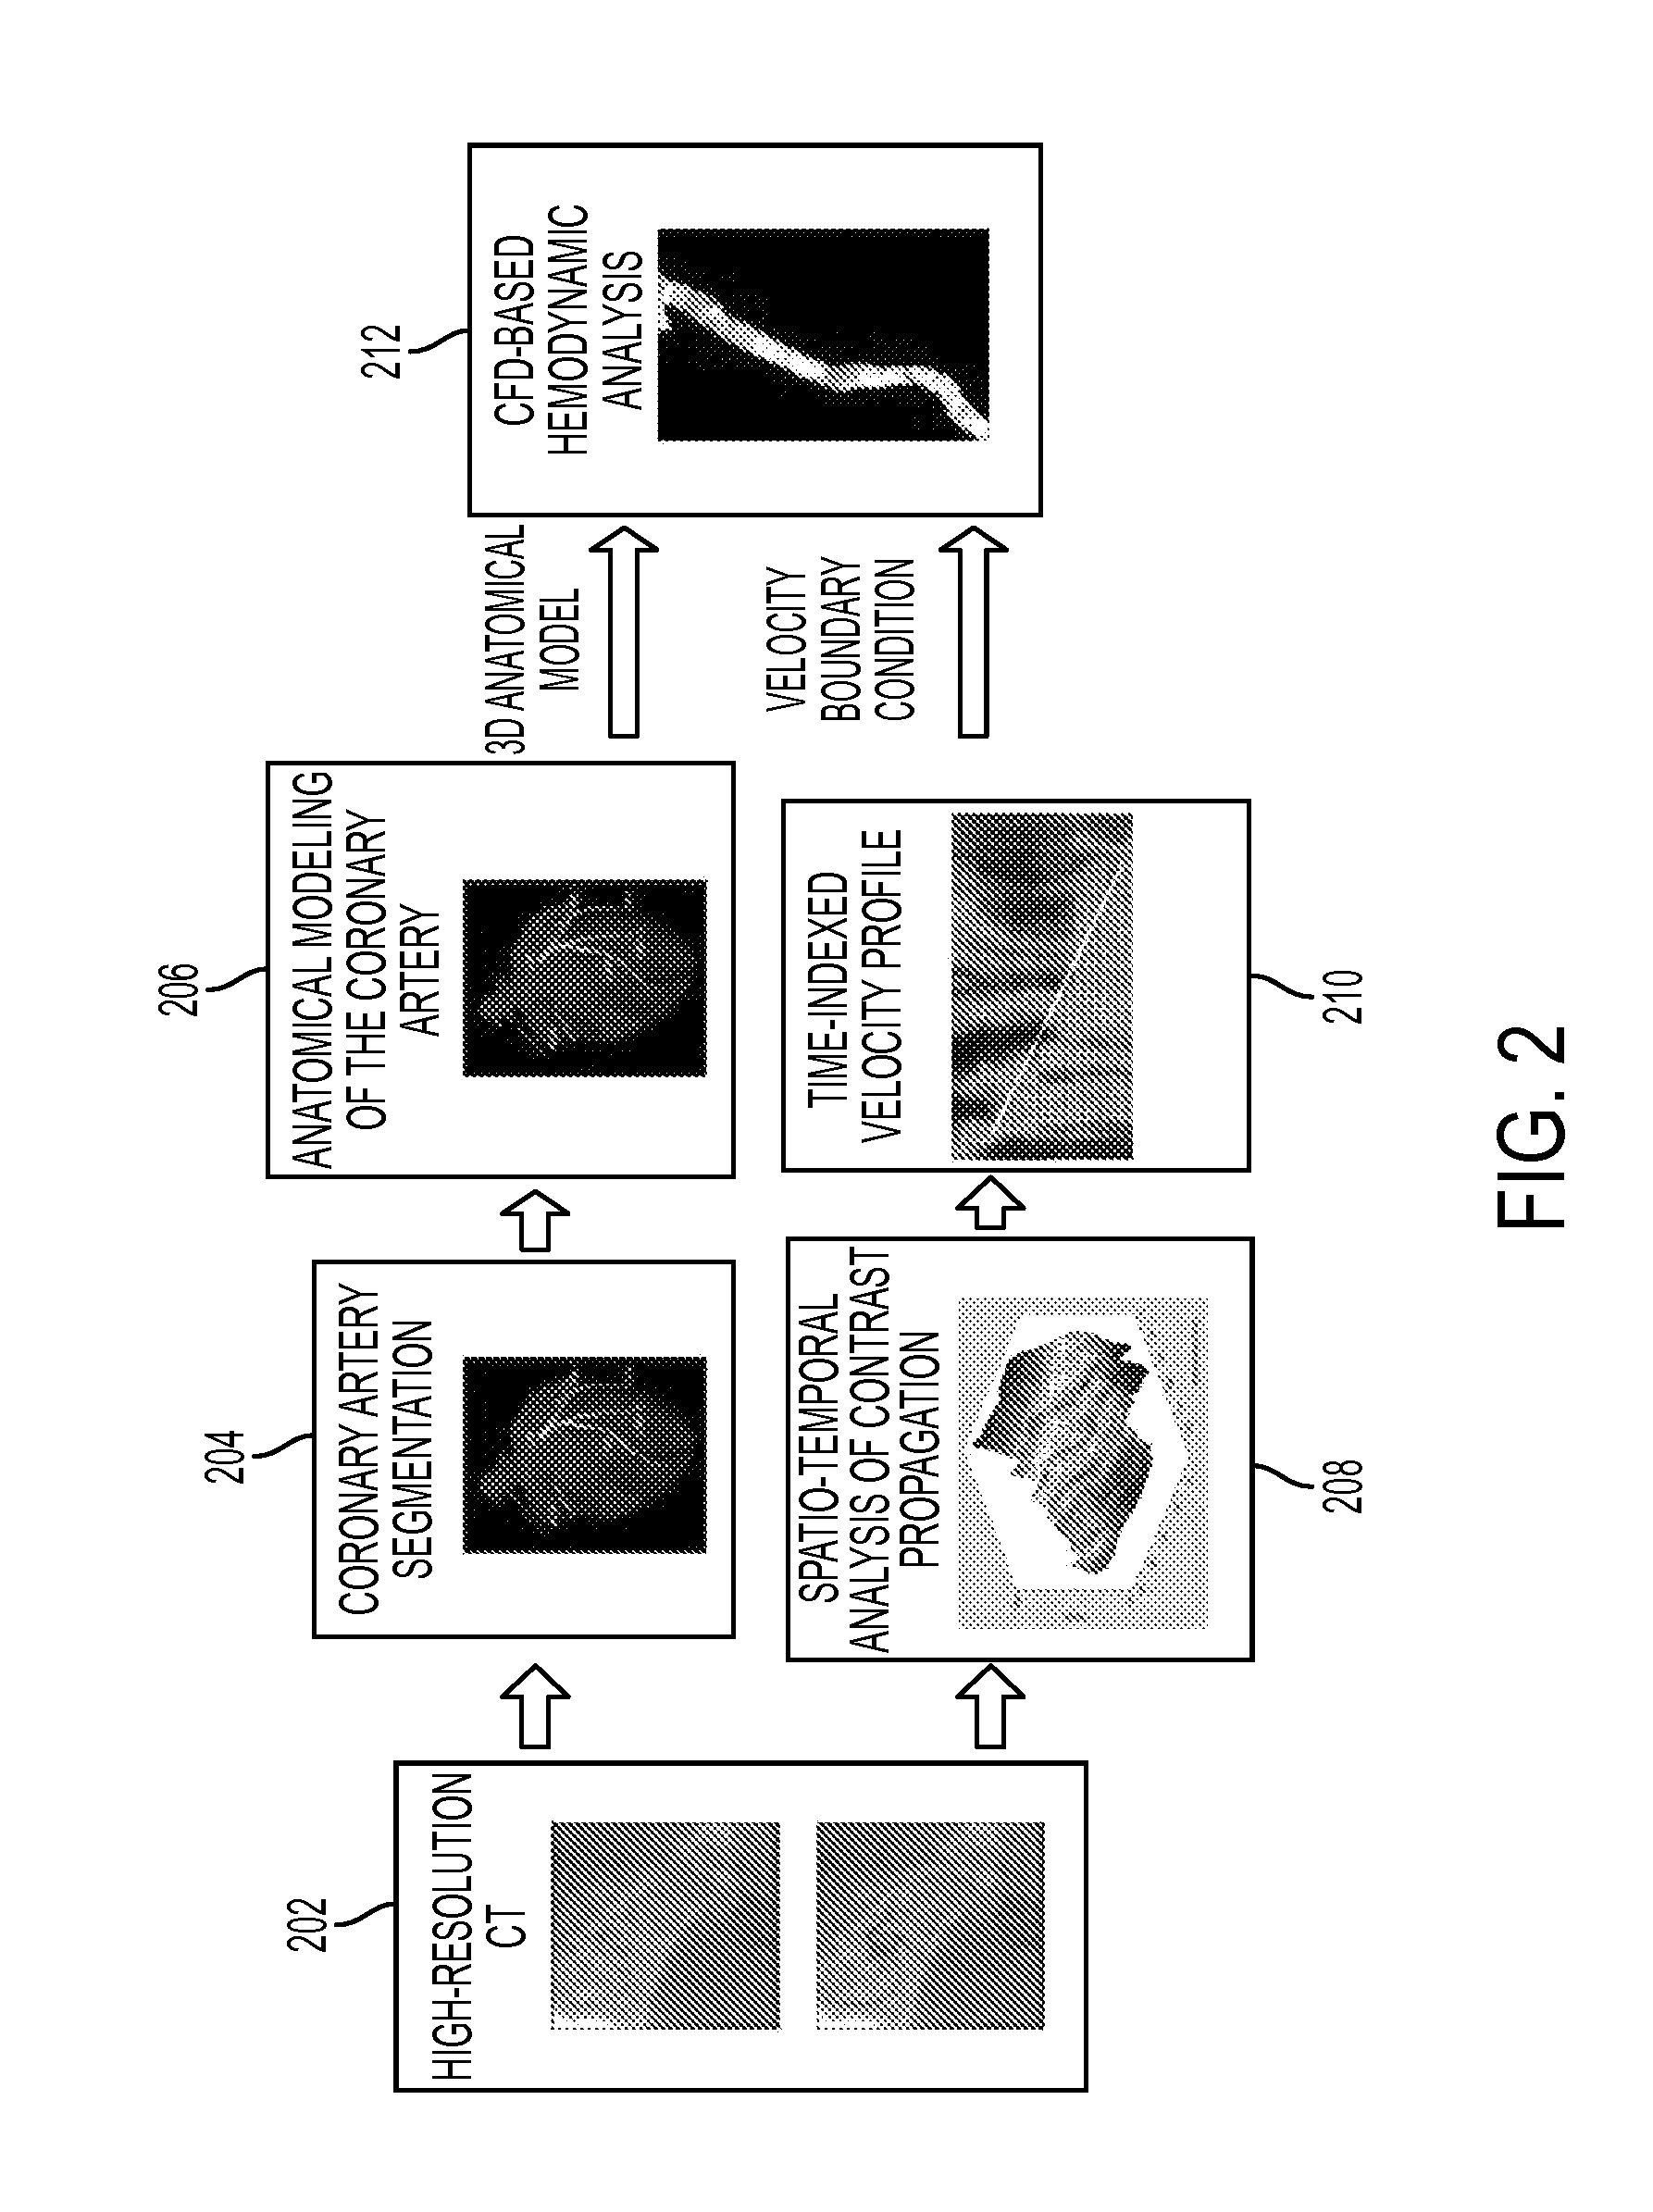 Method and System for Non-Invasive Assessment of Coronary Artery Disease